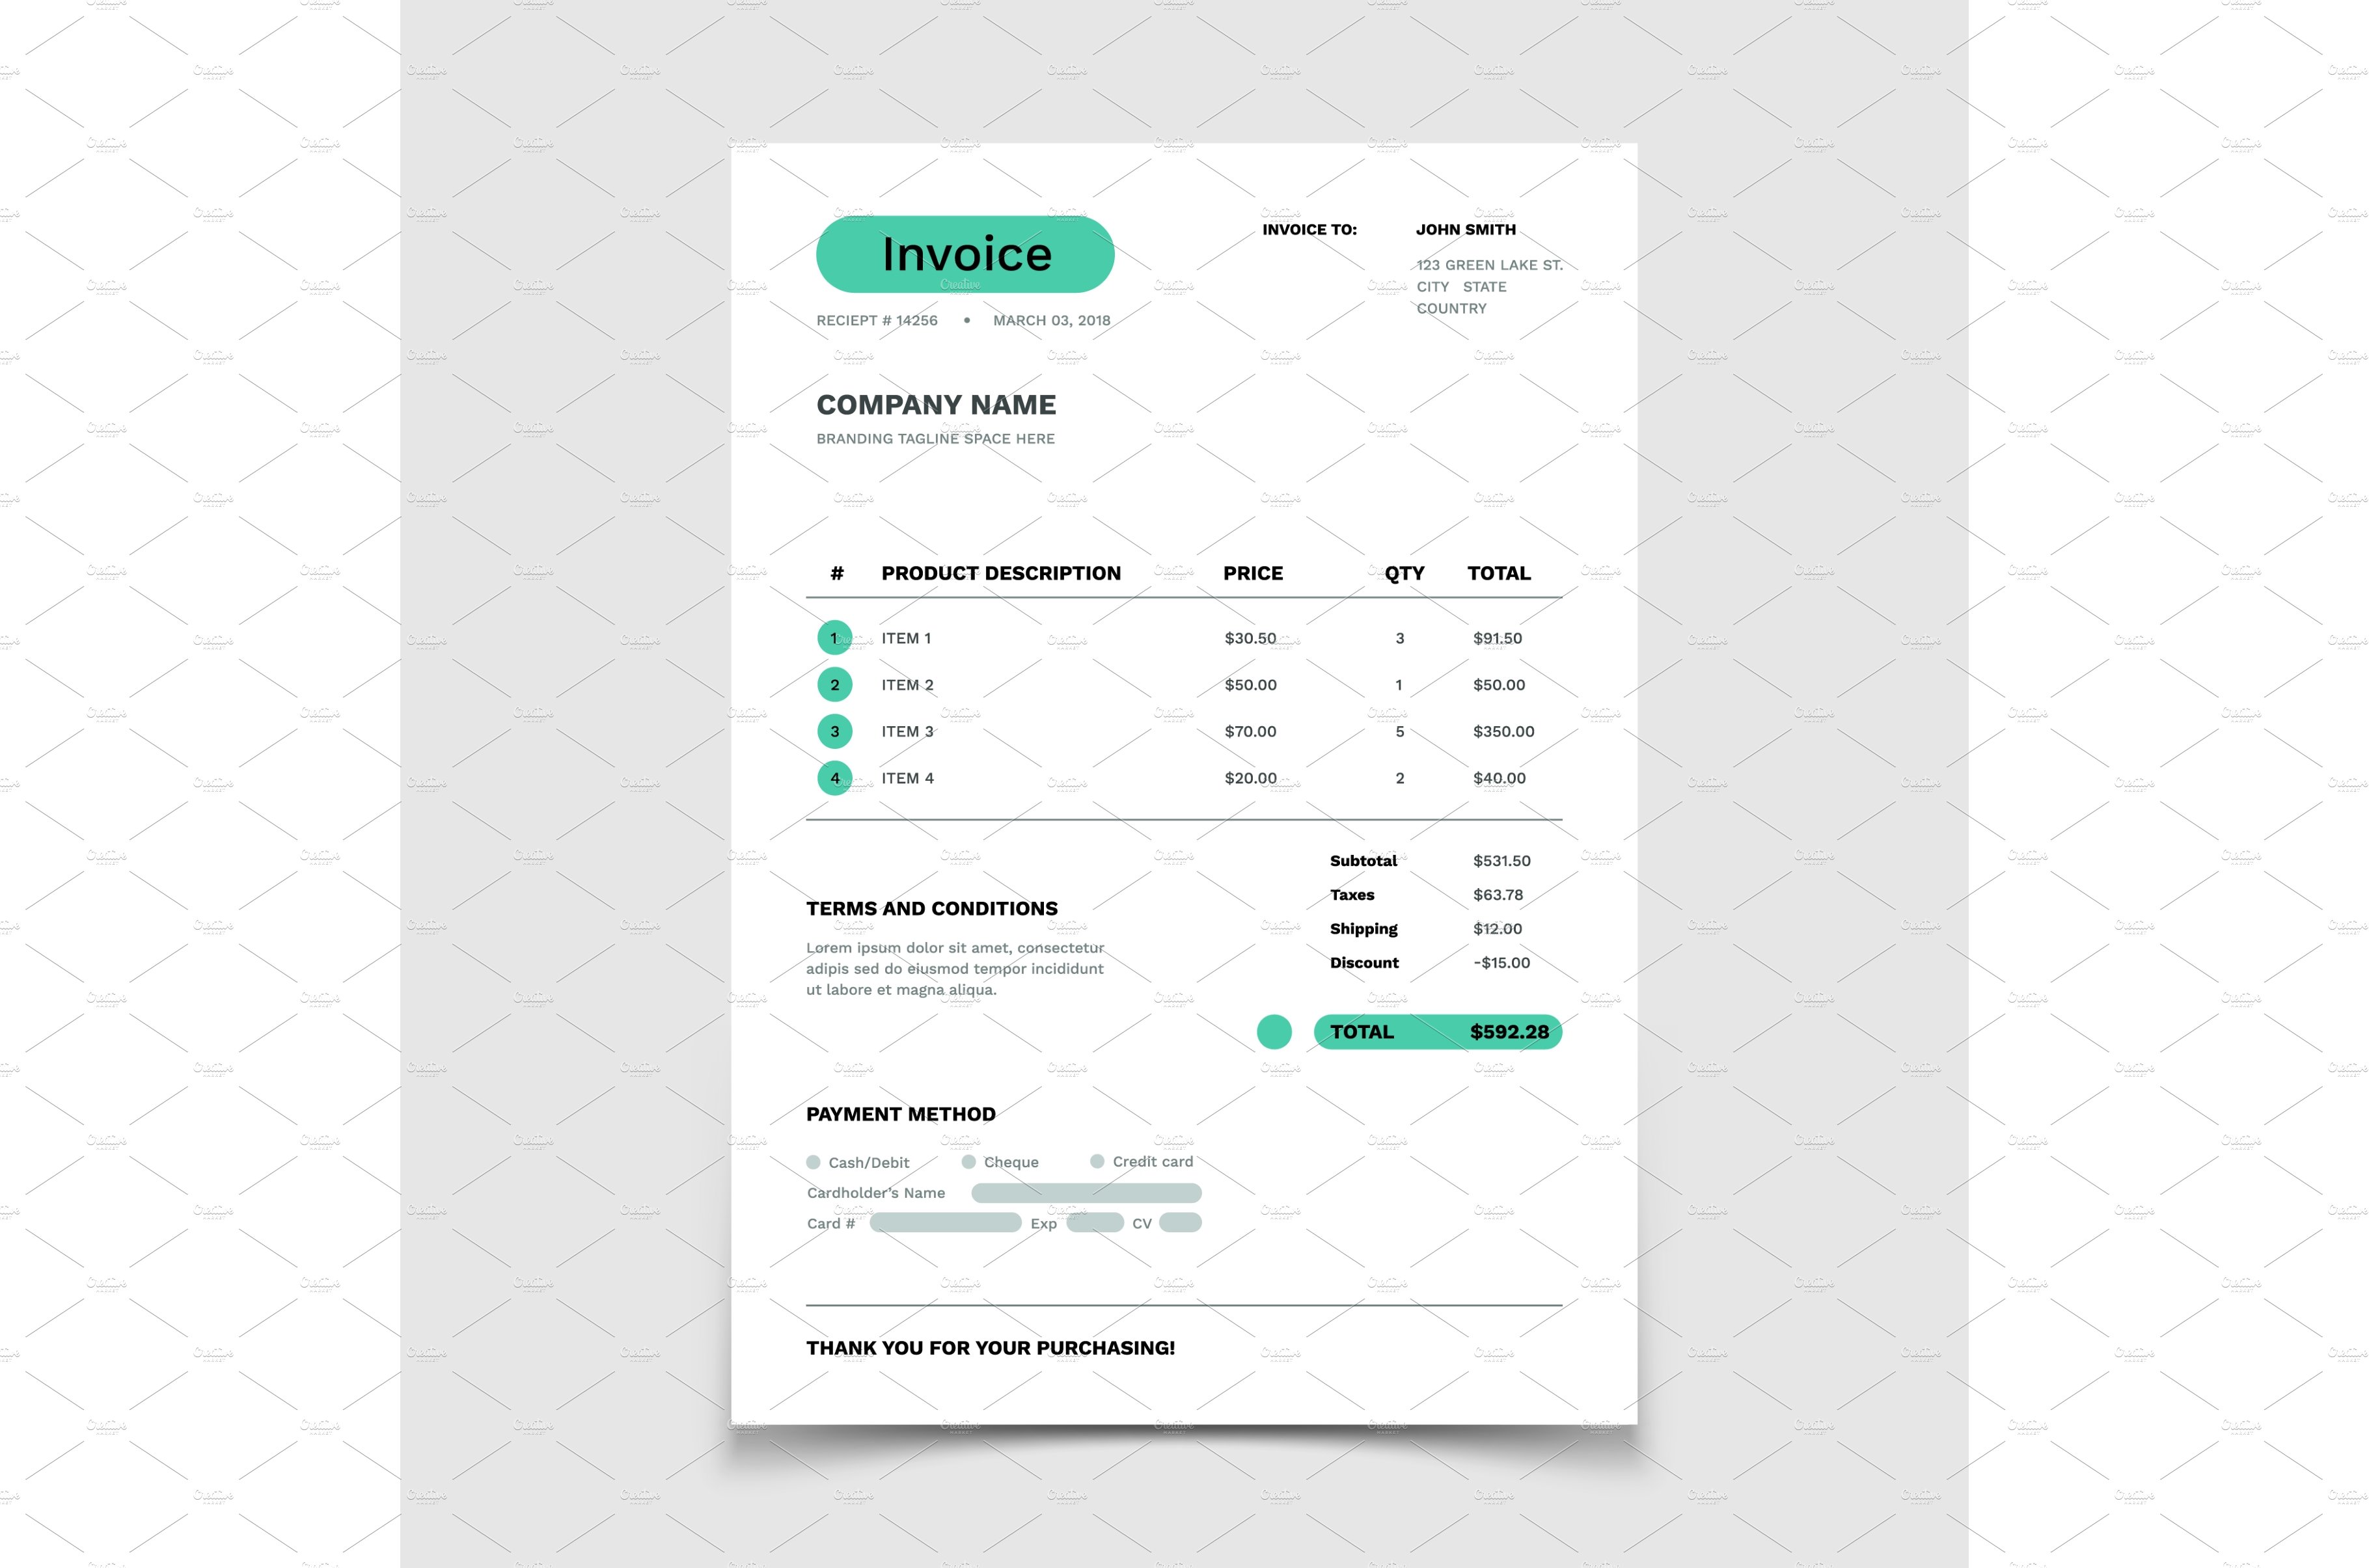 Invoice form template. Business Bill cover image.